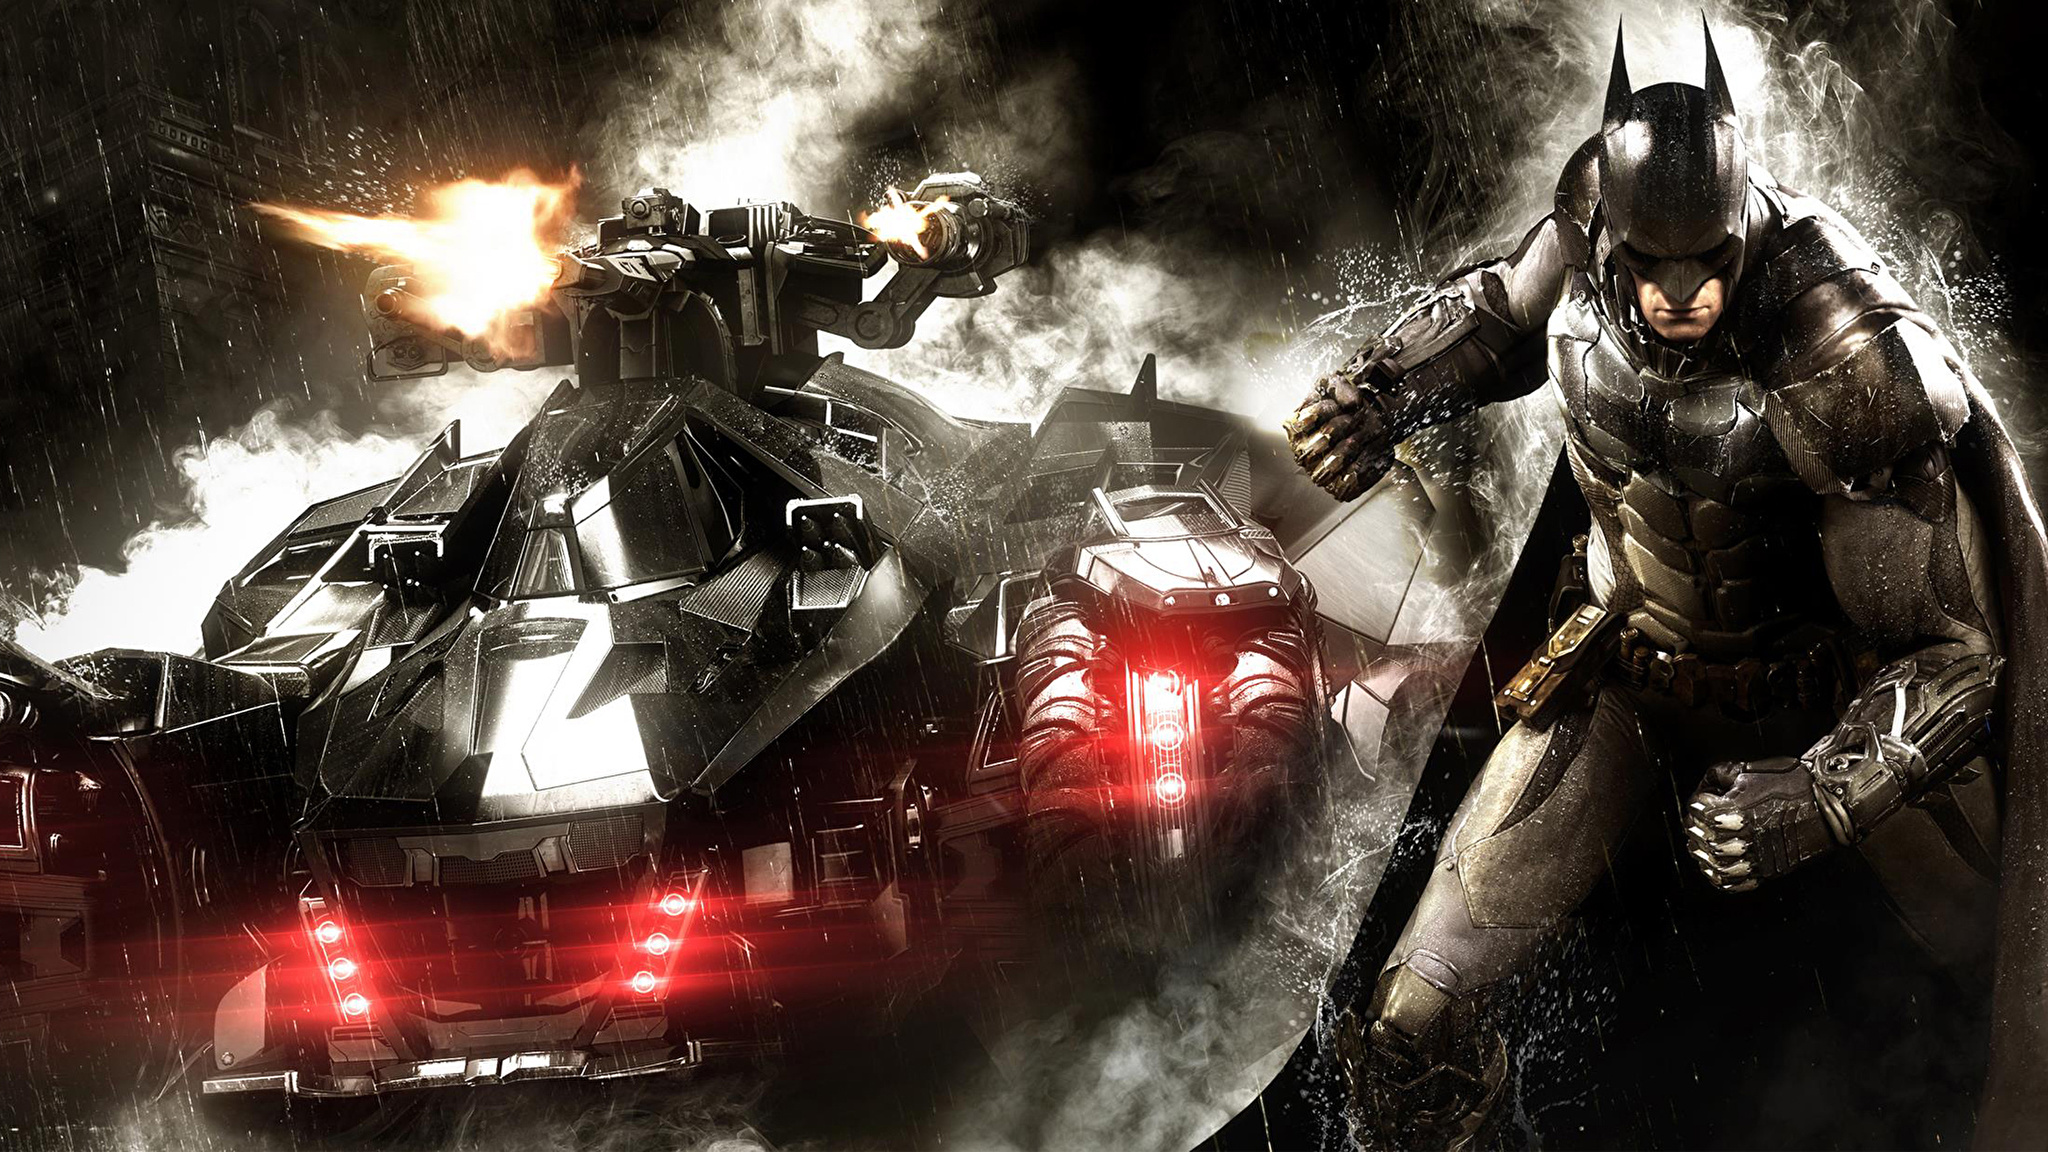 A shot of batman and her car in the batman movie fire 2K wallpaper download